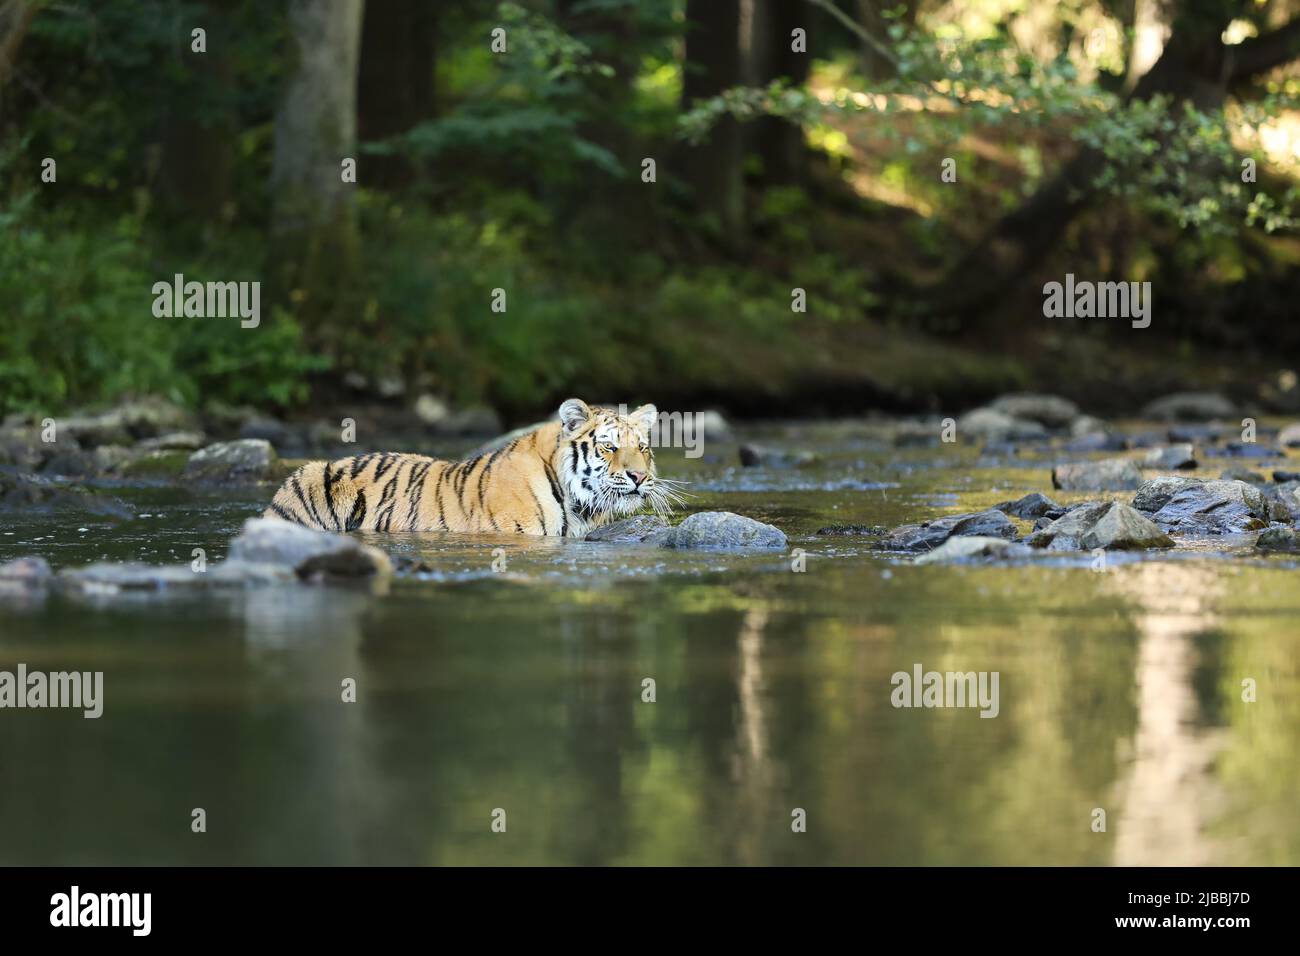 The Siberian tiger Panthera tigris Tigris, or Amur tiger Panthera tigris altaica in the forest walking in a water. Tiger with green background Stock Photo